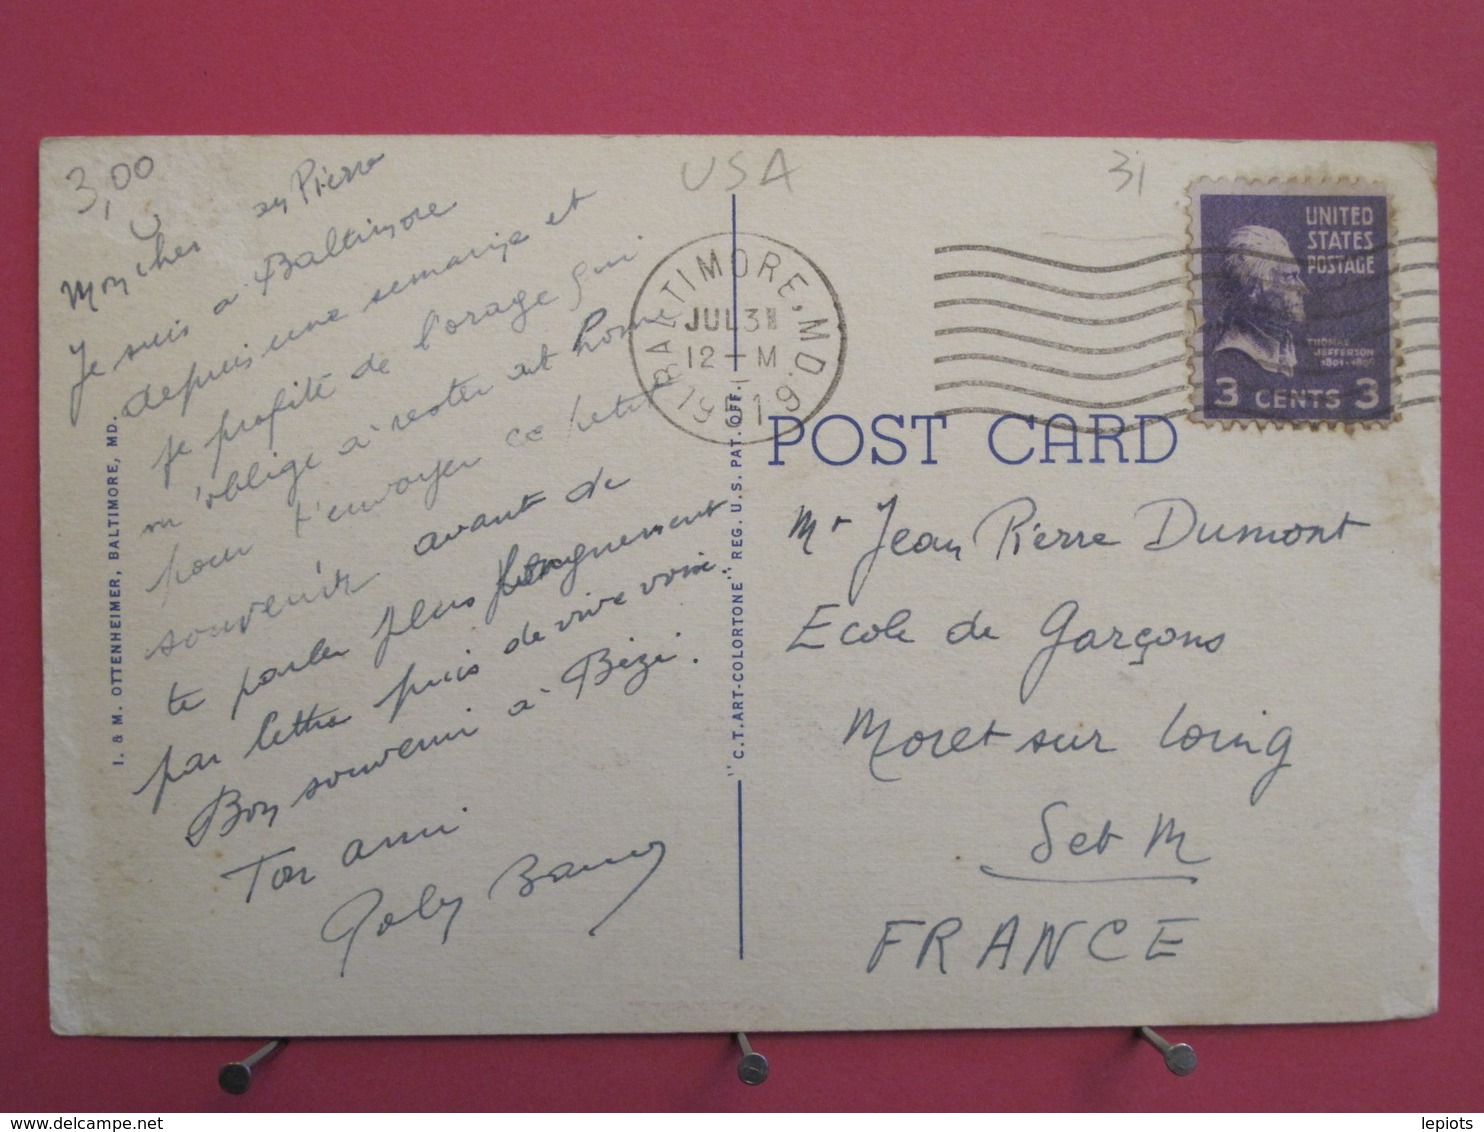 Visuel Très Peu Courant - USA - Maryland - Greetings From Baltimore - Joli Timbre - 1951 - Recto Verso - Baltimore